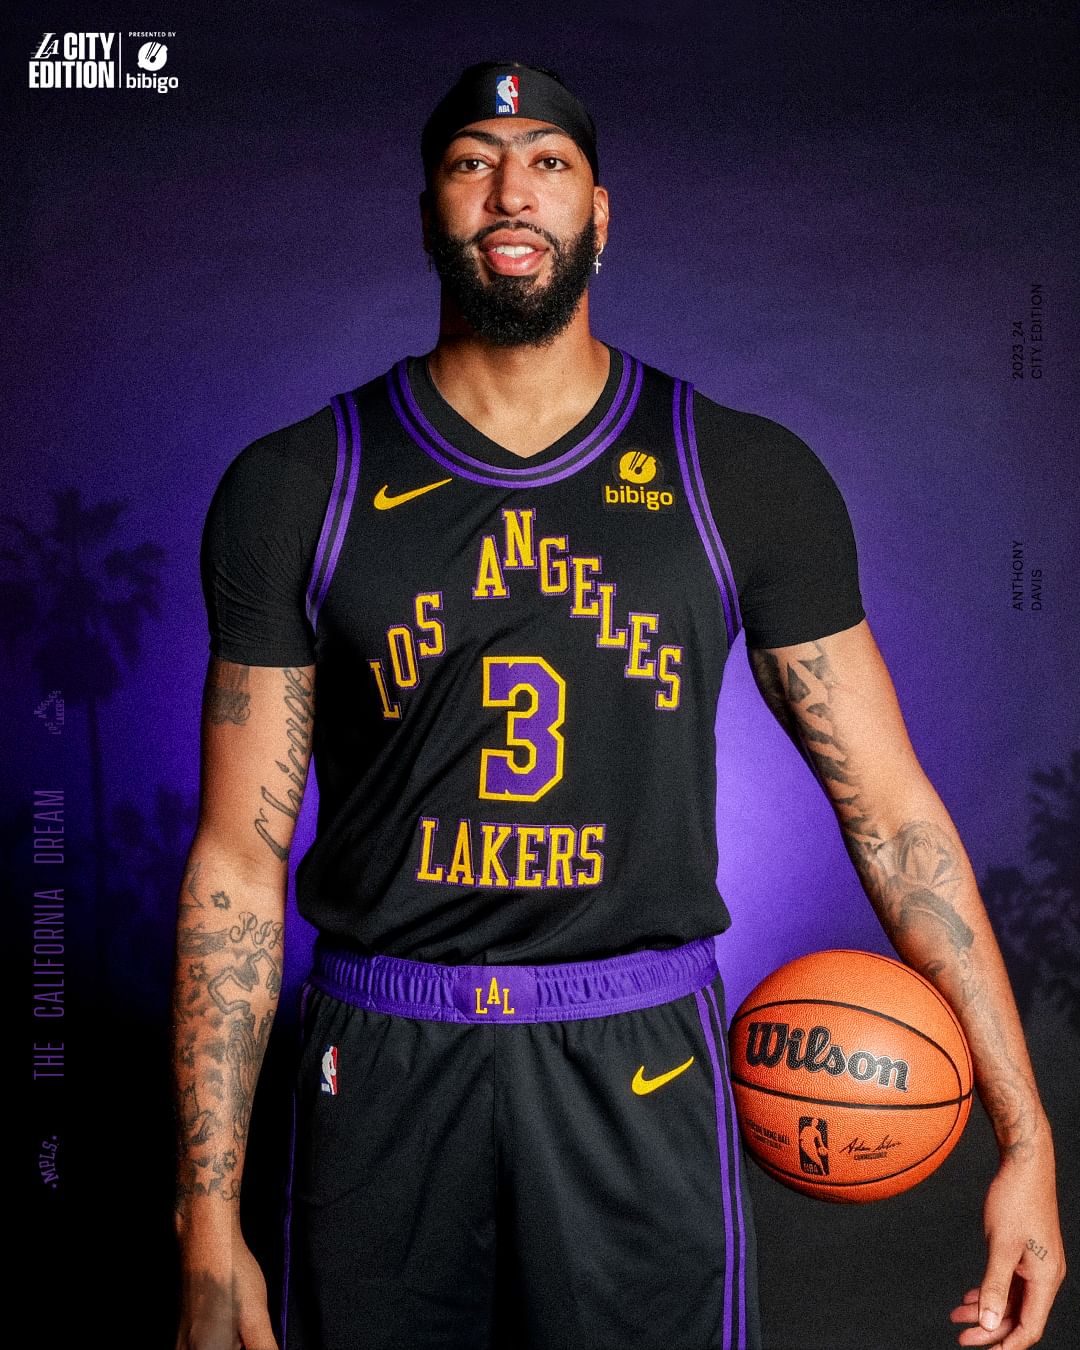 The NBA is making a substantial effort in promoting its City Edition campaign, which involves unveiling the new City Edition jerseys for the Los Angeles Lakers. - amazingmindscape.com